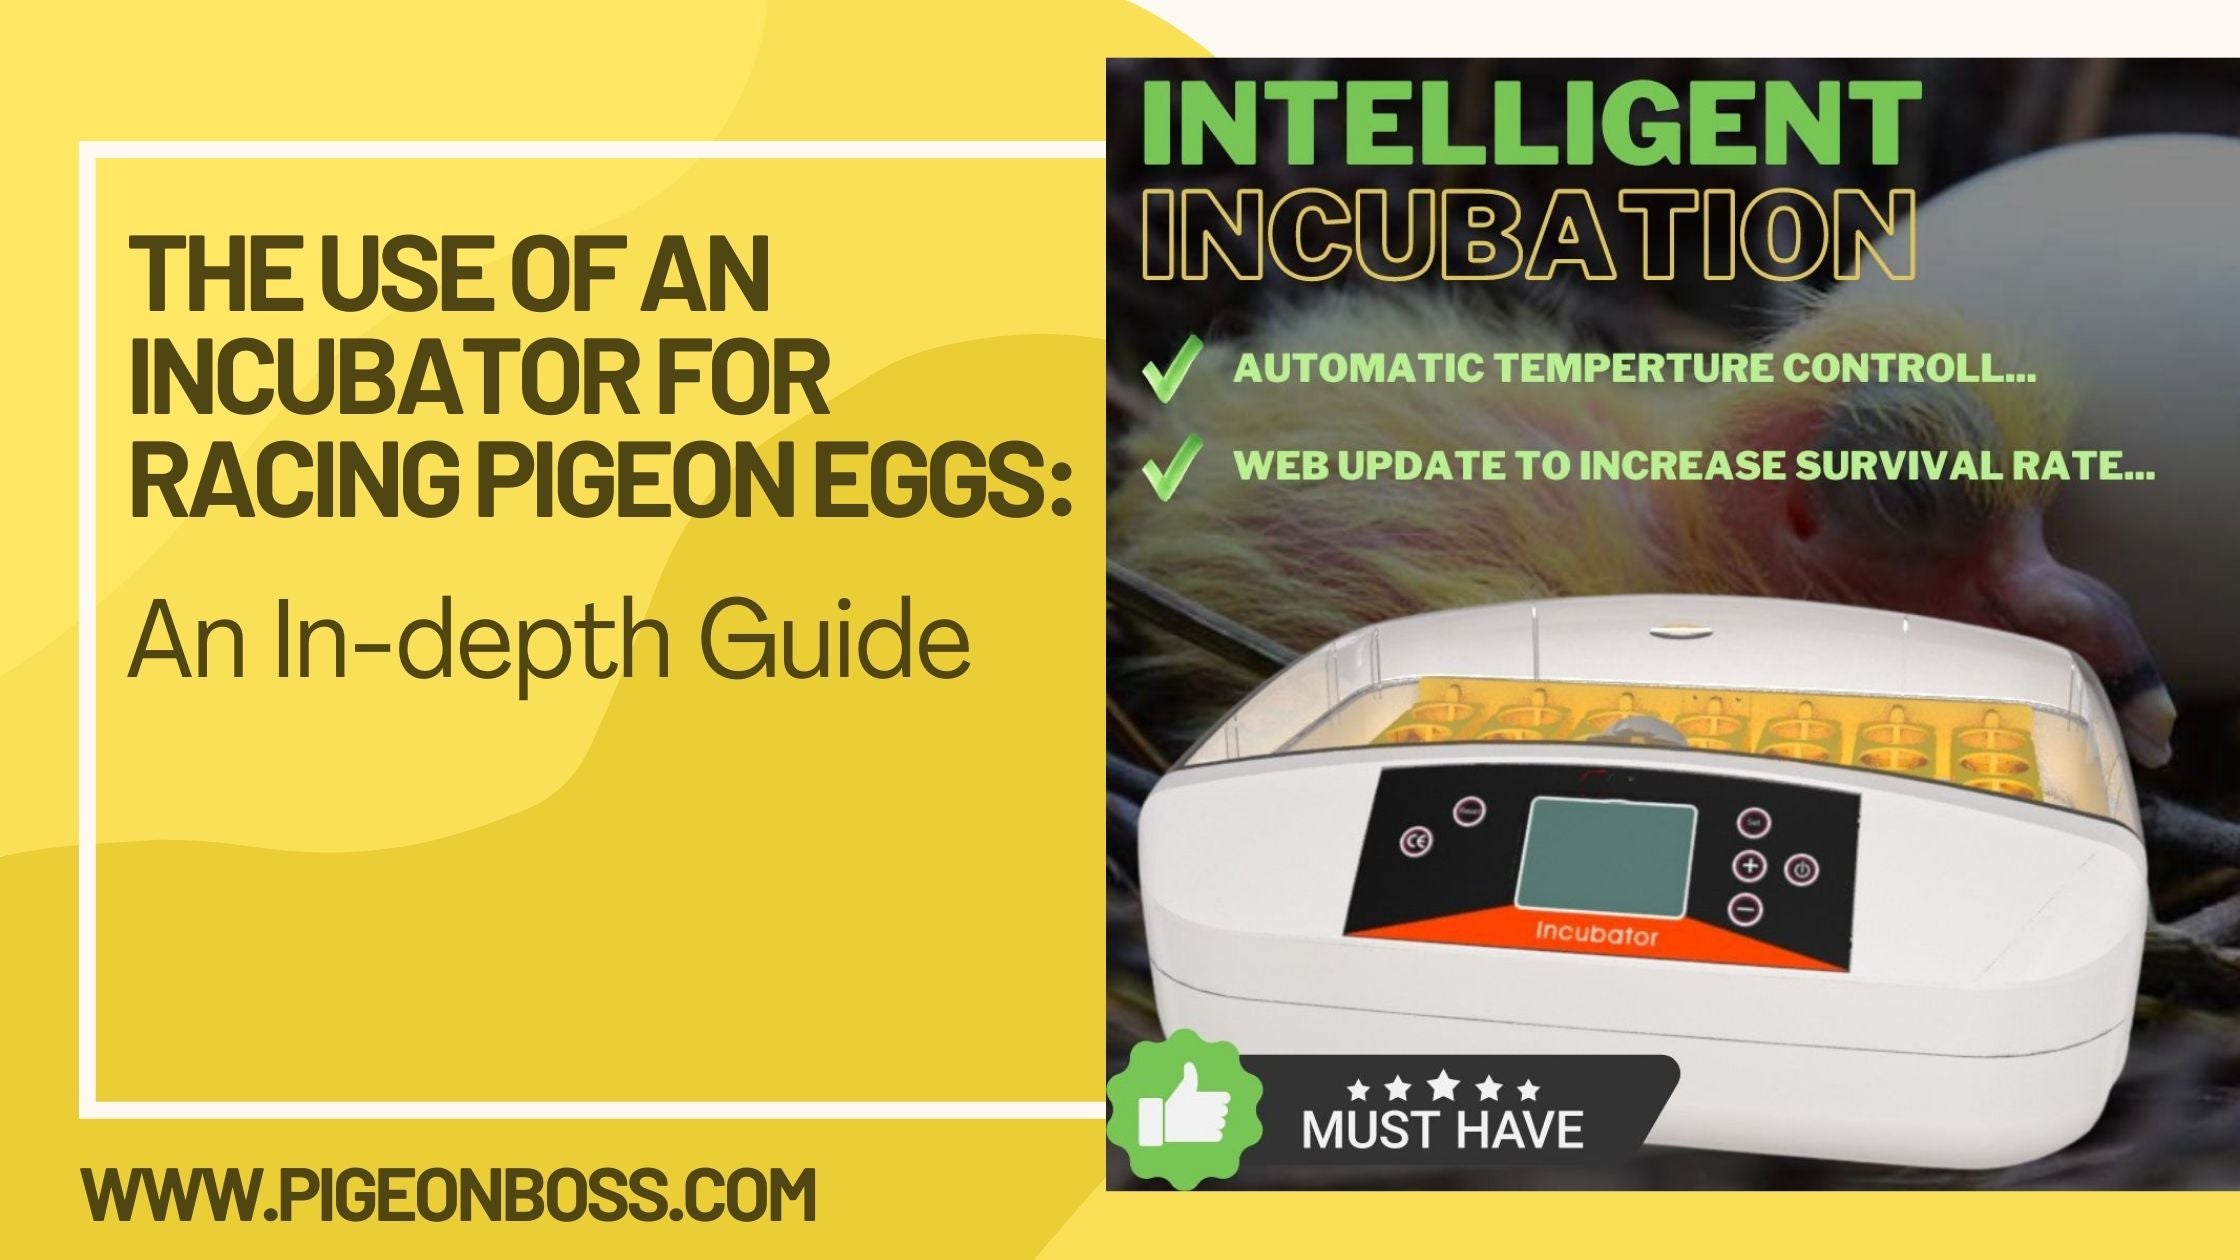 The Use of an Incubator for Racing Pigeon Eggs: An In-depth Guide